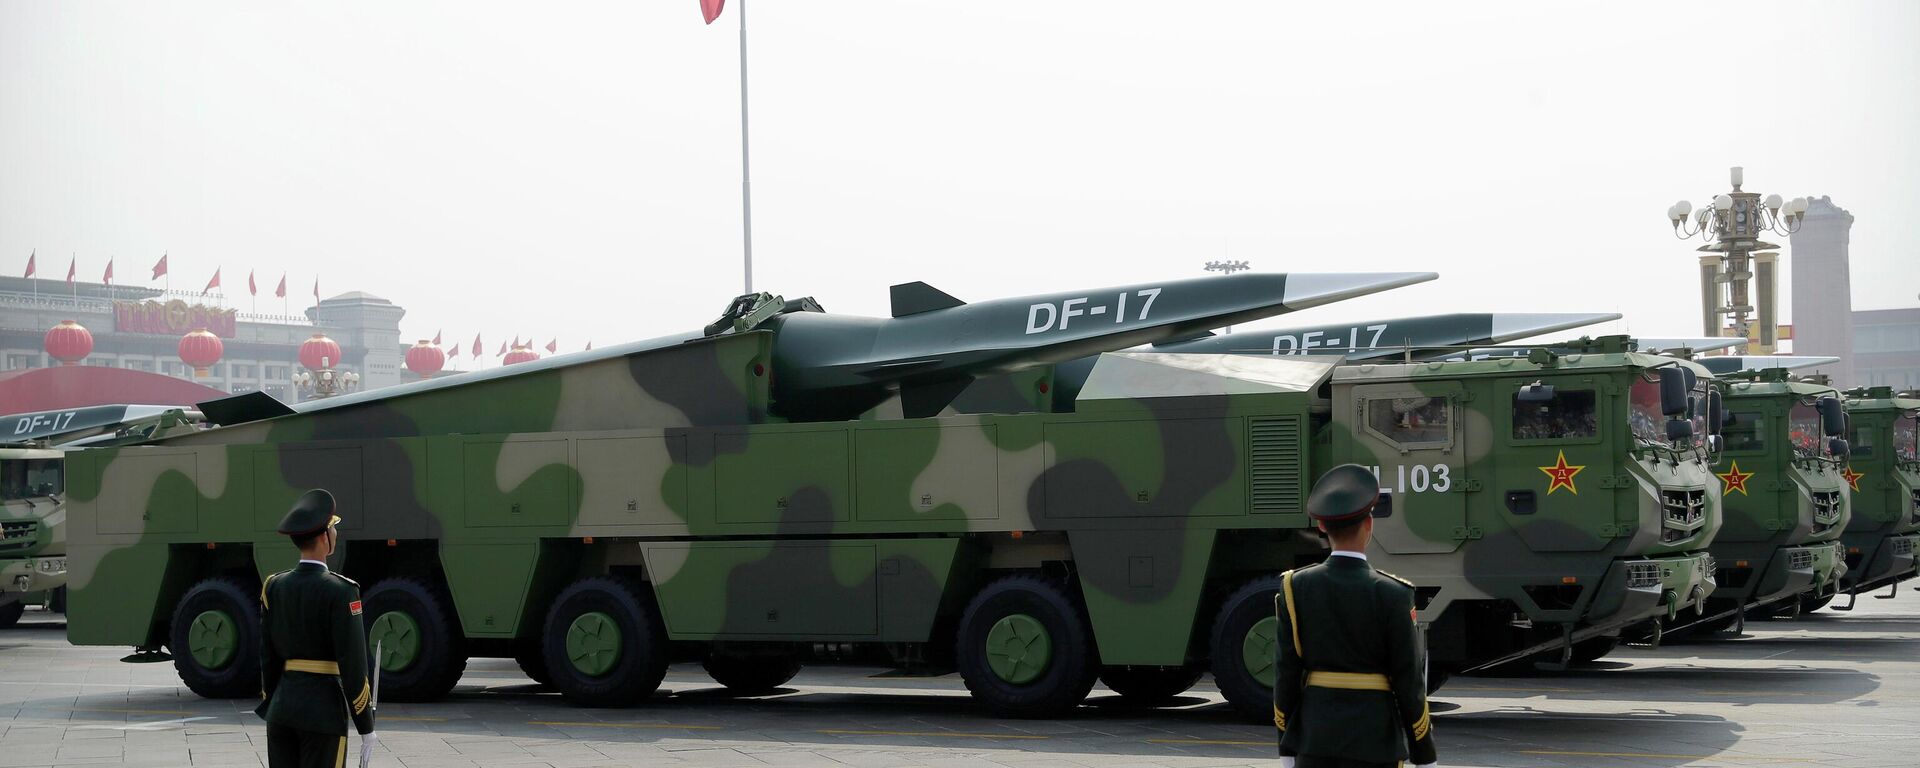 FILE - Chinese military vehicles carrying DF-17 ballistic missiles roll during a parade to commemorate the 70th anniversary of the founding of Communist China in Beijing, on Oct. 1, 2019 - Sputnik International, 1920, 05.08.2022